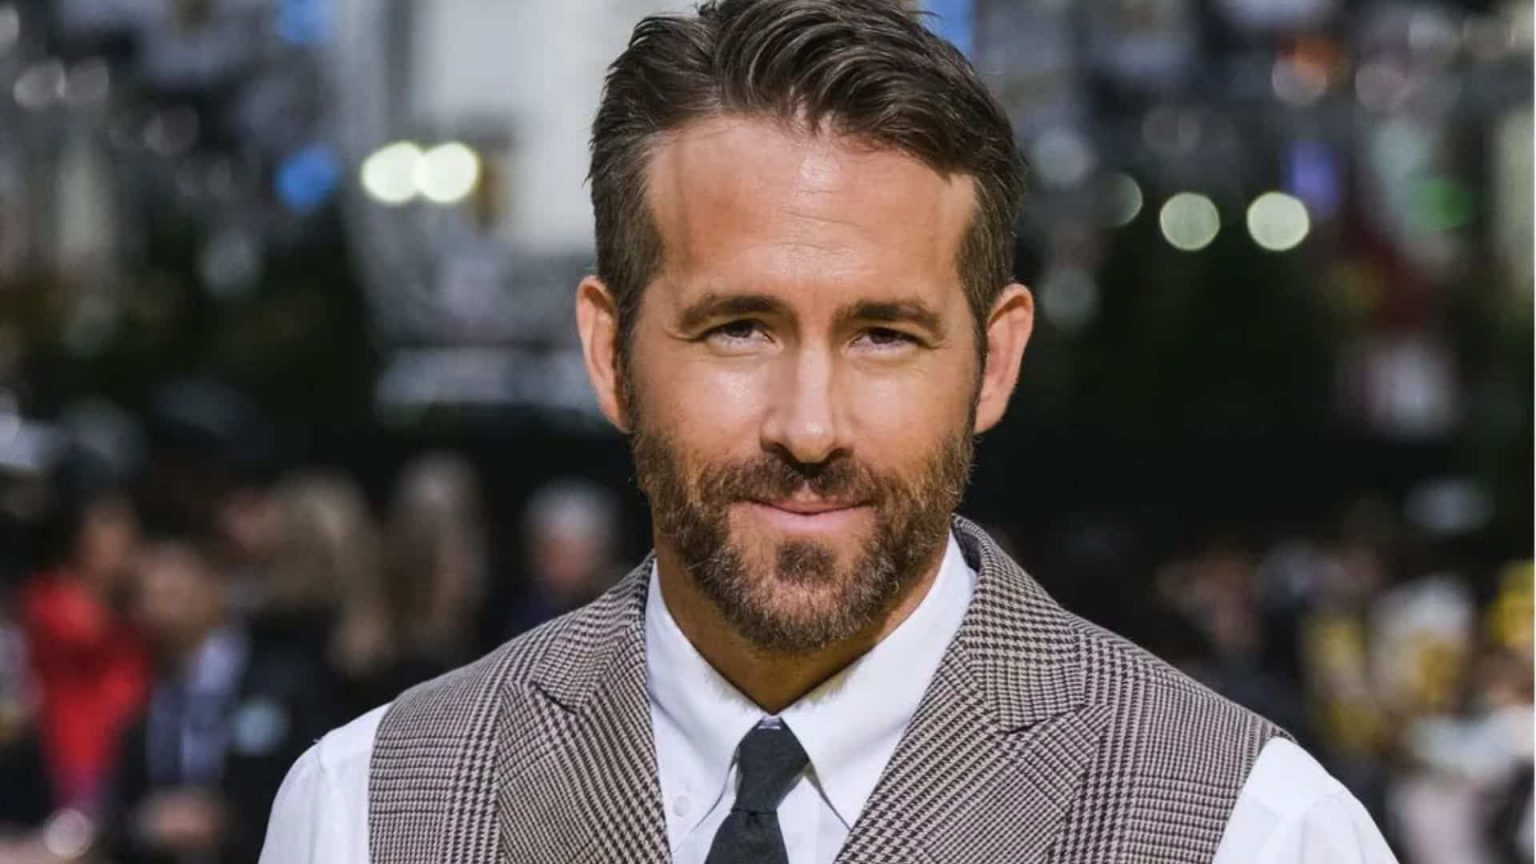 does ryan reynolds own mint mobile